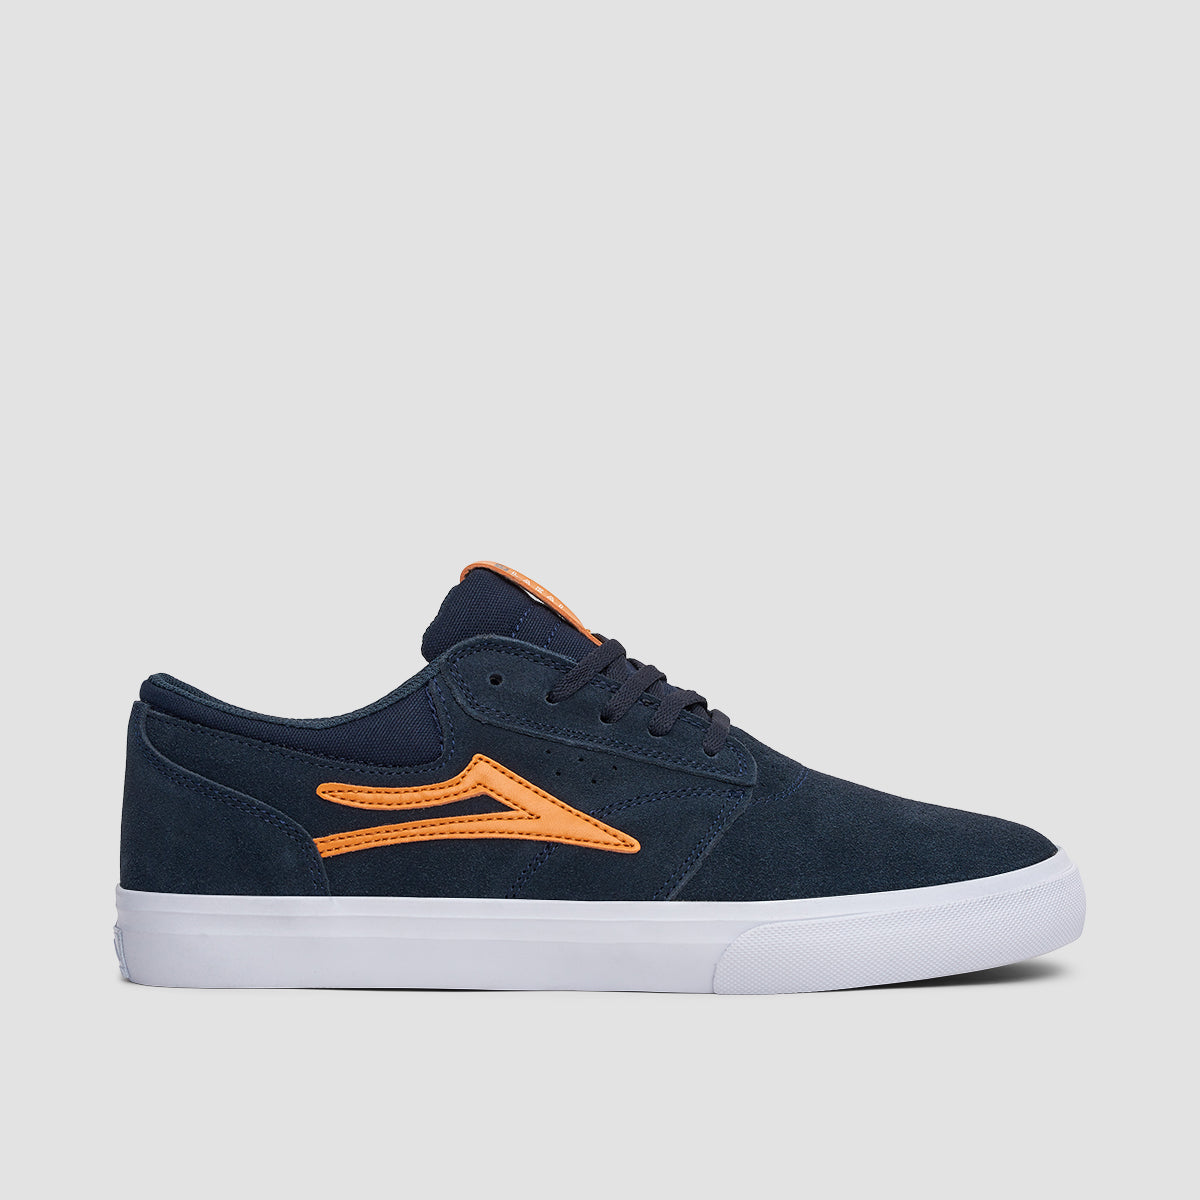 Lakai Griffin Shoes - Midnight Suede